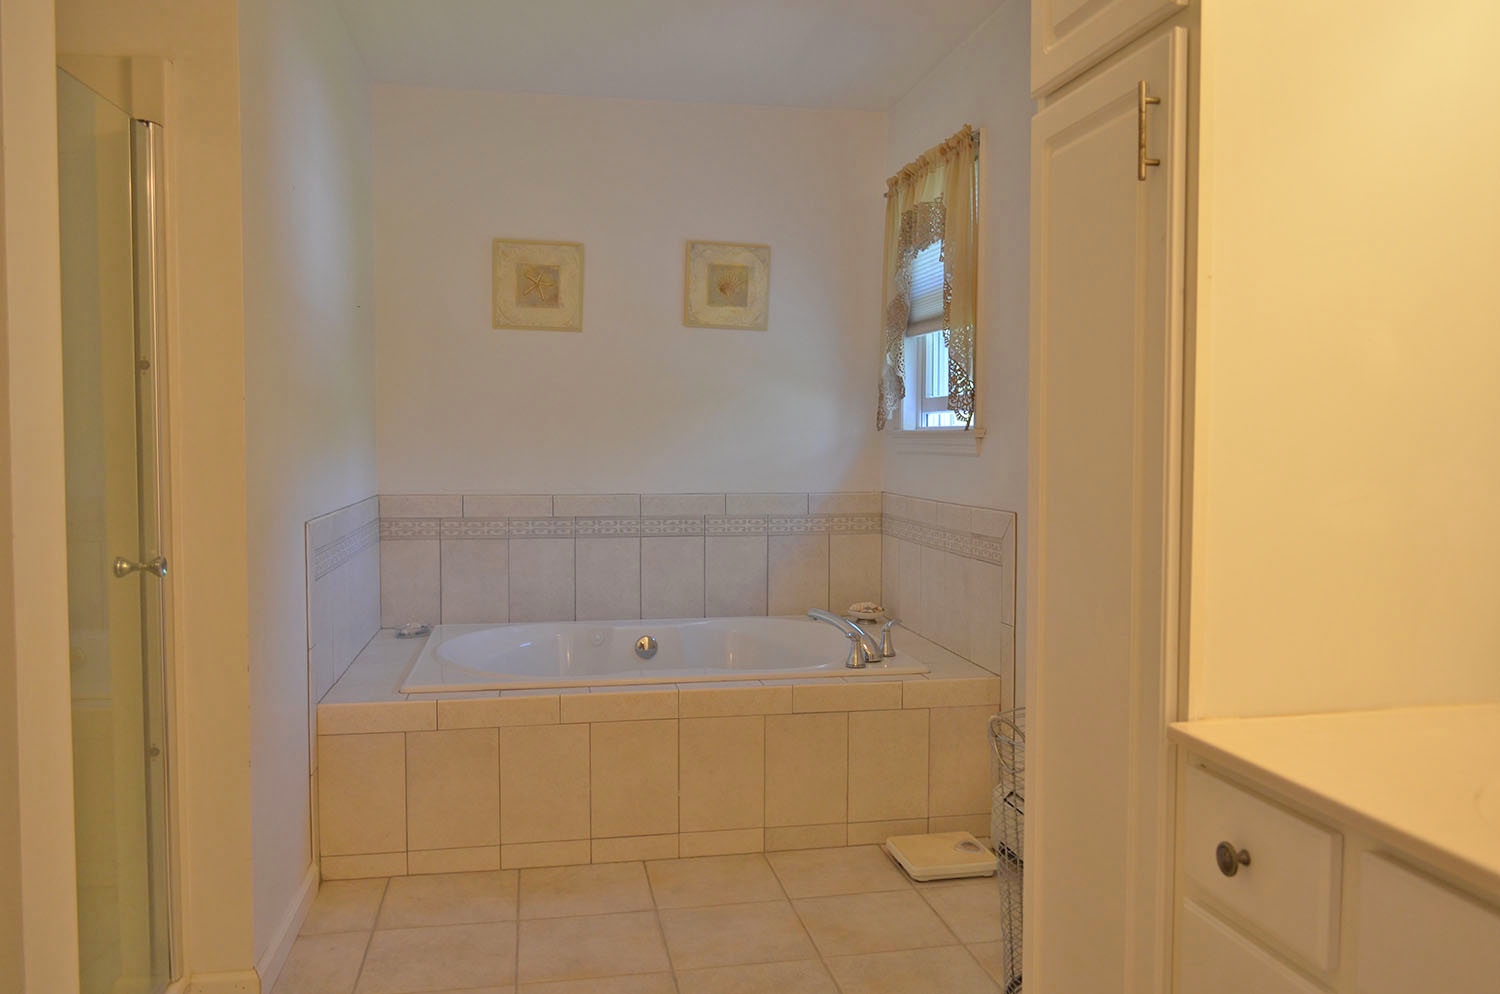 Ensuite Primary bath with tub and walk-in shower.